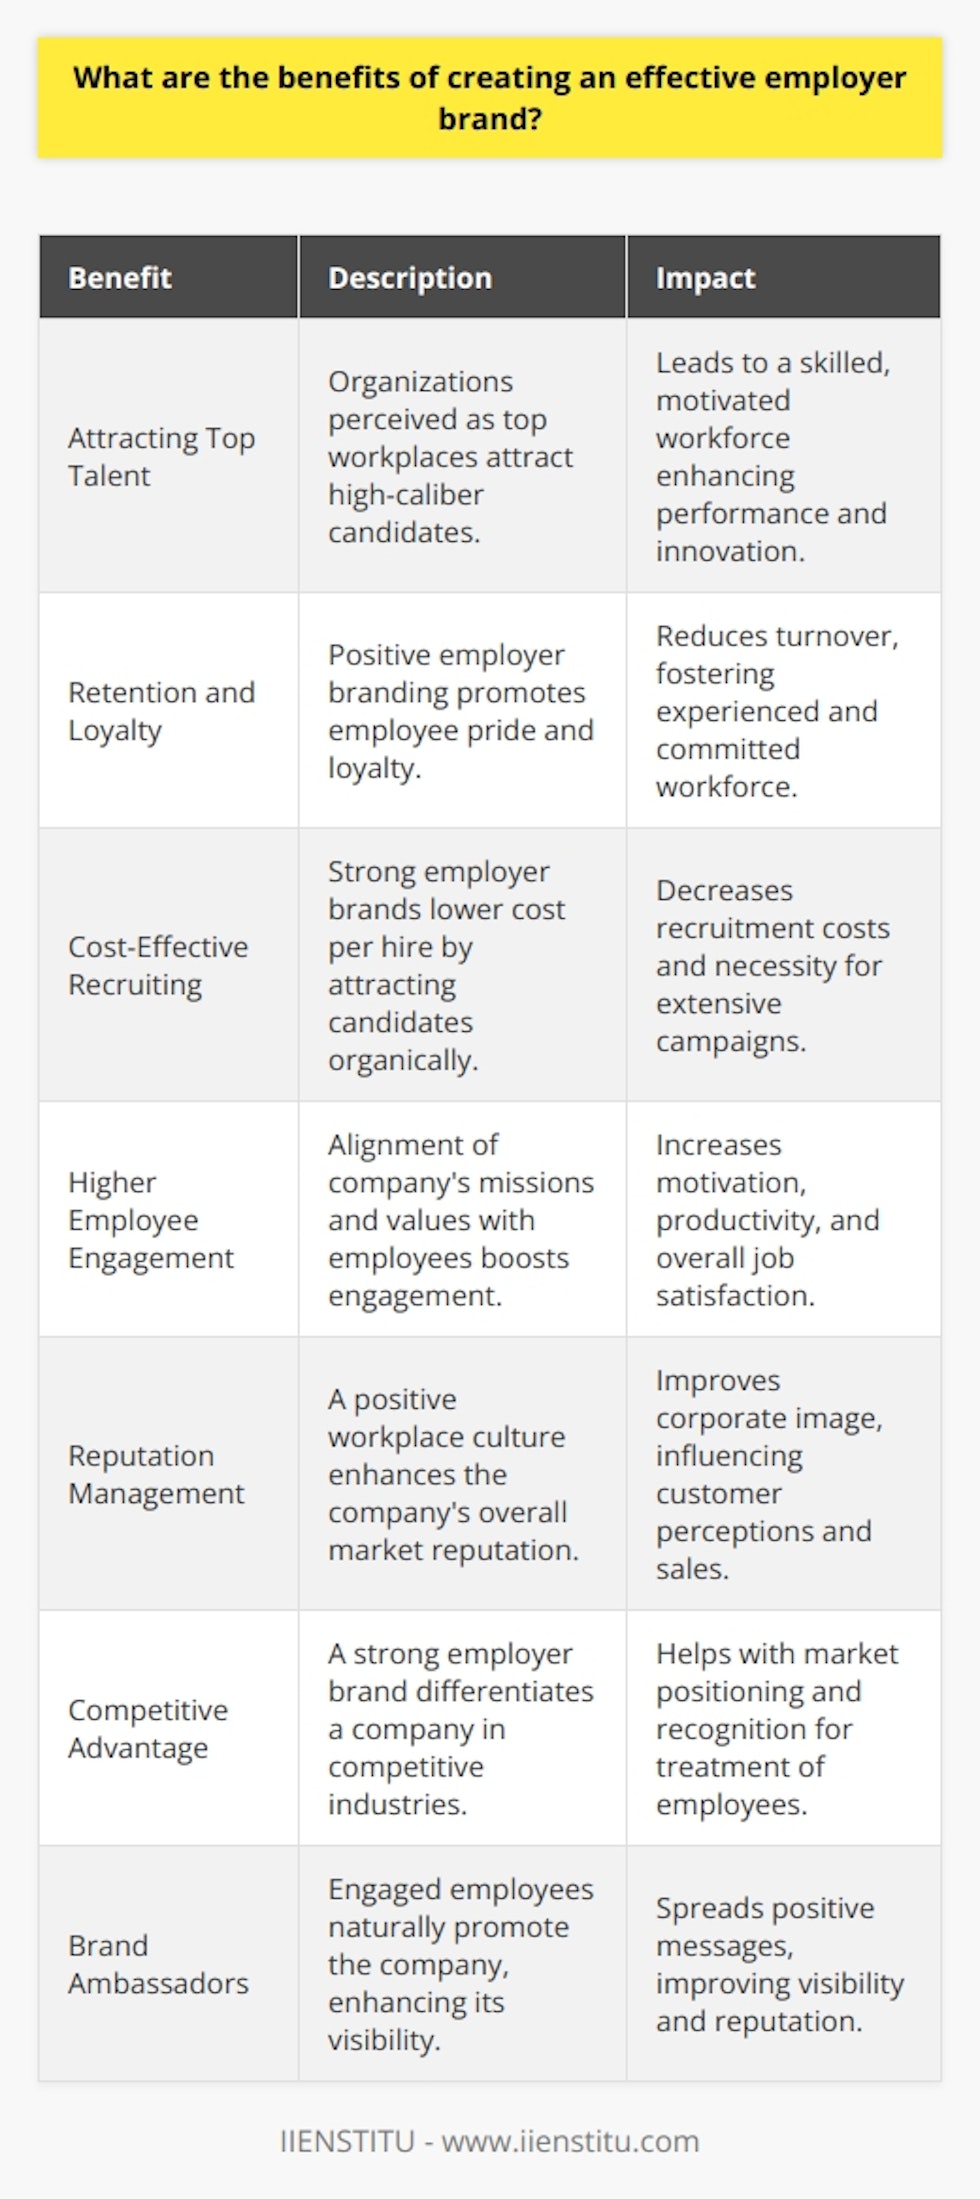 The development of a strong employer brand is a strategic endeavor that can significantly benefit an organization in several ways, enhancing its standing both internally among employees and externally within the job market and industry.Attracting Top Talent: Central to an effective employer brand is the ability to draw in high-caliber candidates. When an organization is perceived as an excellent place to work, it becomes a magnet for professionals who are seeking a working environment that aligns with their expectations and values. This can lead to a more skilled and motivated workforce, ultimately improving the performance and innovation within the company.Retention and Loyalty: A well-crafted employer brand is not just about drawing in new talent—it also plays a vital role in retaining existing talent. When workers feel proud to be associated with their employer, they are more likely to stay reduce turnover rates. This not only saves costs associated with hiring and training but fosters a more experienced, knowledgeable, and committed workforce.Cost-Effective Recruiting: Organizations with a robust employer brand may find that their cost per hire decreases over time. As the brand strength grows, so does the volume of potential candidates aware of the company's culture and offerings, often reducing the need for extensive and expensive recruiting campaigns.Higher Employee Engagement: An effective employer brand can lead to enhanced engagement among staff. When the missions and values of a company are clearly communicated and reflected in the everyday working experience, employees often feel more aligned and committed to their employer's goals, resulting in increased motivation, productivity, and job satisfaction.Reputation Management: The ripple effects of an established employer brand reach beyond just recruitment and retention, impacting the overall reputation of the organization in the market. Companies that are known to treat their employees well and offer a positive workplace culture tend to enjoy an improved corporate image, which can influence customer perceptions and ultimately sales.Competitive Advantage: In highly competitive industries, an exceptional employer brand can be the differentiating factor that sets a company apart from its rivals. It can be instrumental in market positioning, helping an organization to be recognized not only for what it sells but also for how it treats its people.Brand Ambassadors: Employees become brand ambassadors when they feel positively about their employer's brand. Whether through word-of-mouth, social media, or professional networks, engaged employees can spread positive messages that enhance the company's visibility and reputation.Overall, executing a strategic approach to employer branding can significantly impact an organization's success. Companies like IIENSTITU, which specialize in providing educational resources, are keenly aware of the importance of employer branding in today's competitive landscape. By nurturing a brand that resonates with current and potential stakeholders, organizations can create a virtuous cycle that strengthens their position, appeal, and longevity within their respective industries.